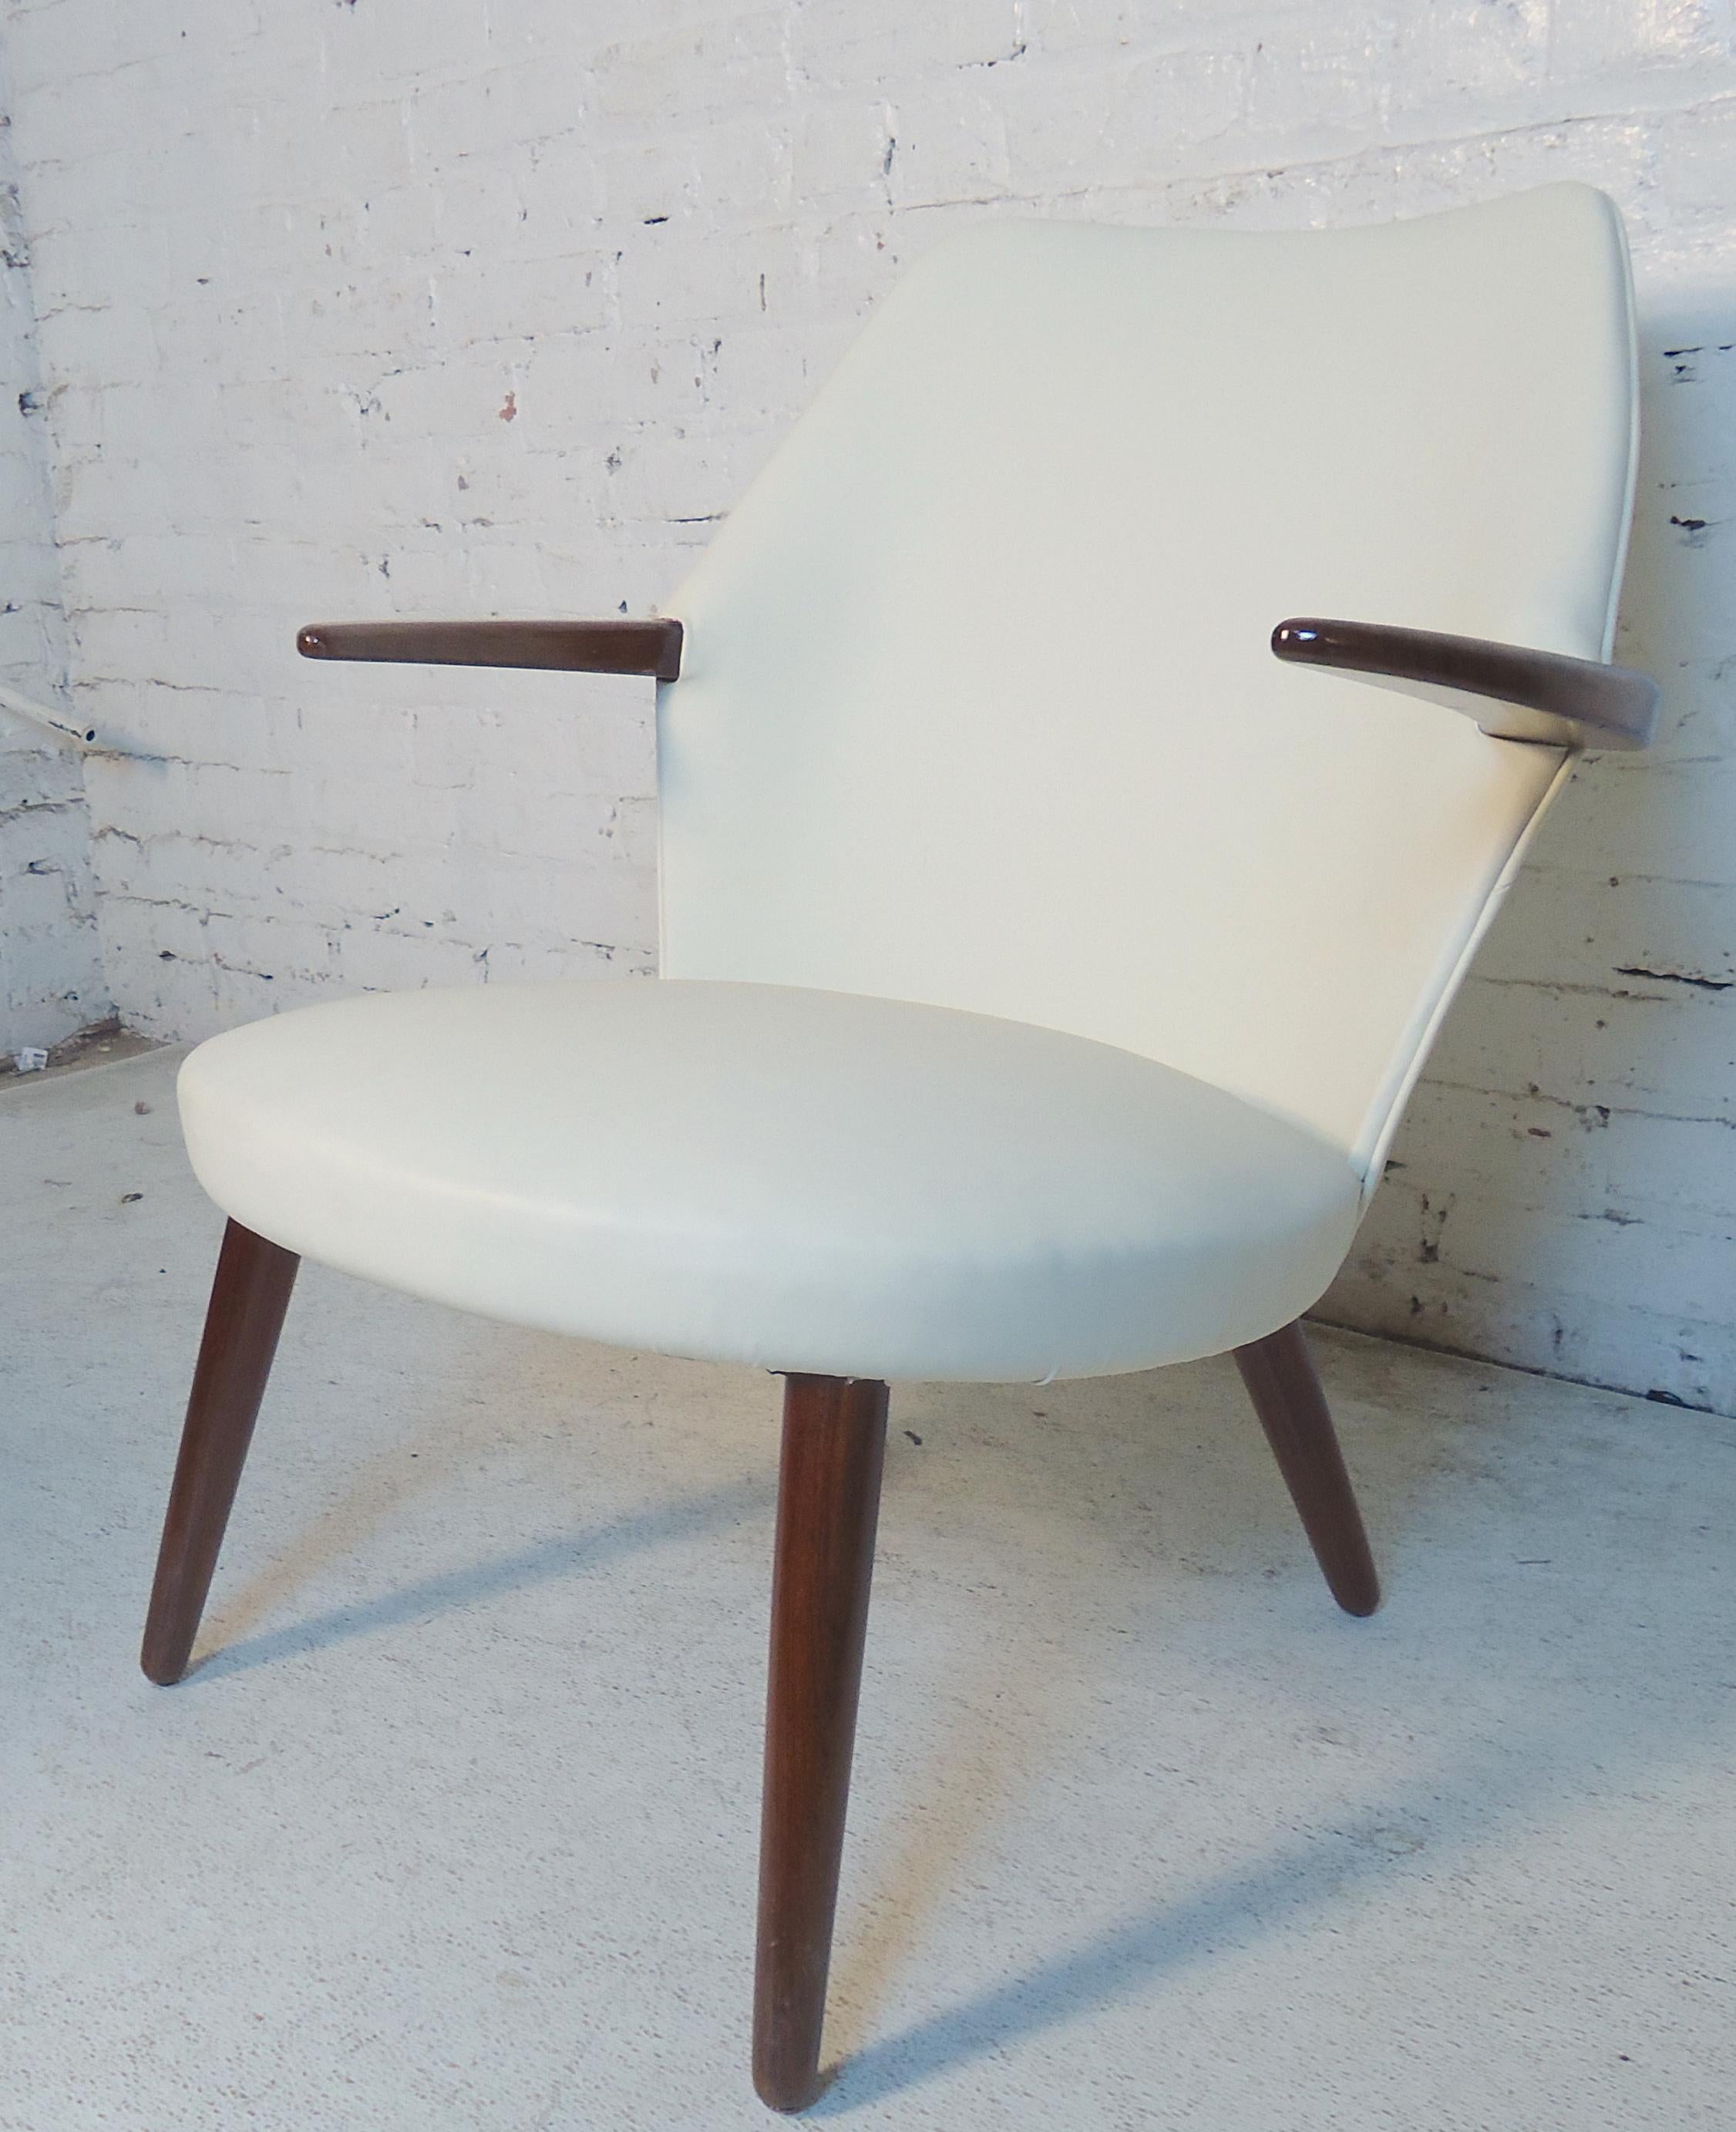 Unusual vintage modern armchair with white Naugahyde and rosewood arms and legs.
(Please confirm item location - NY or NJ - with dealer).
 